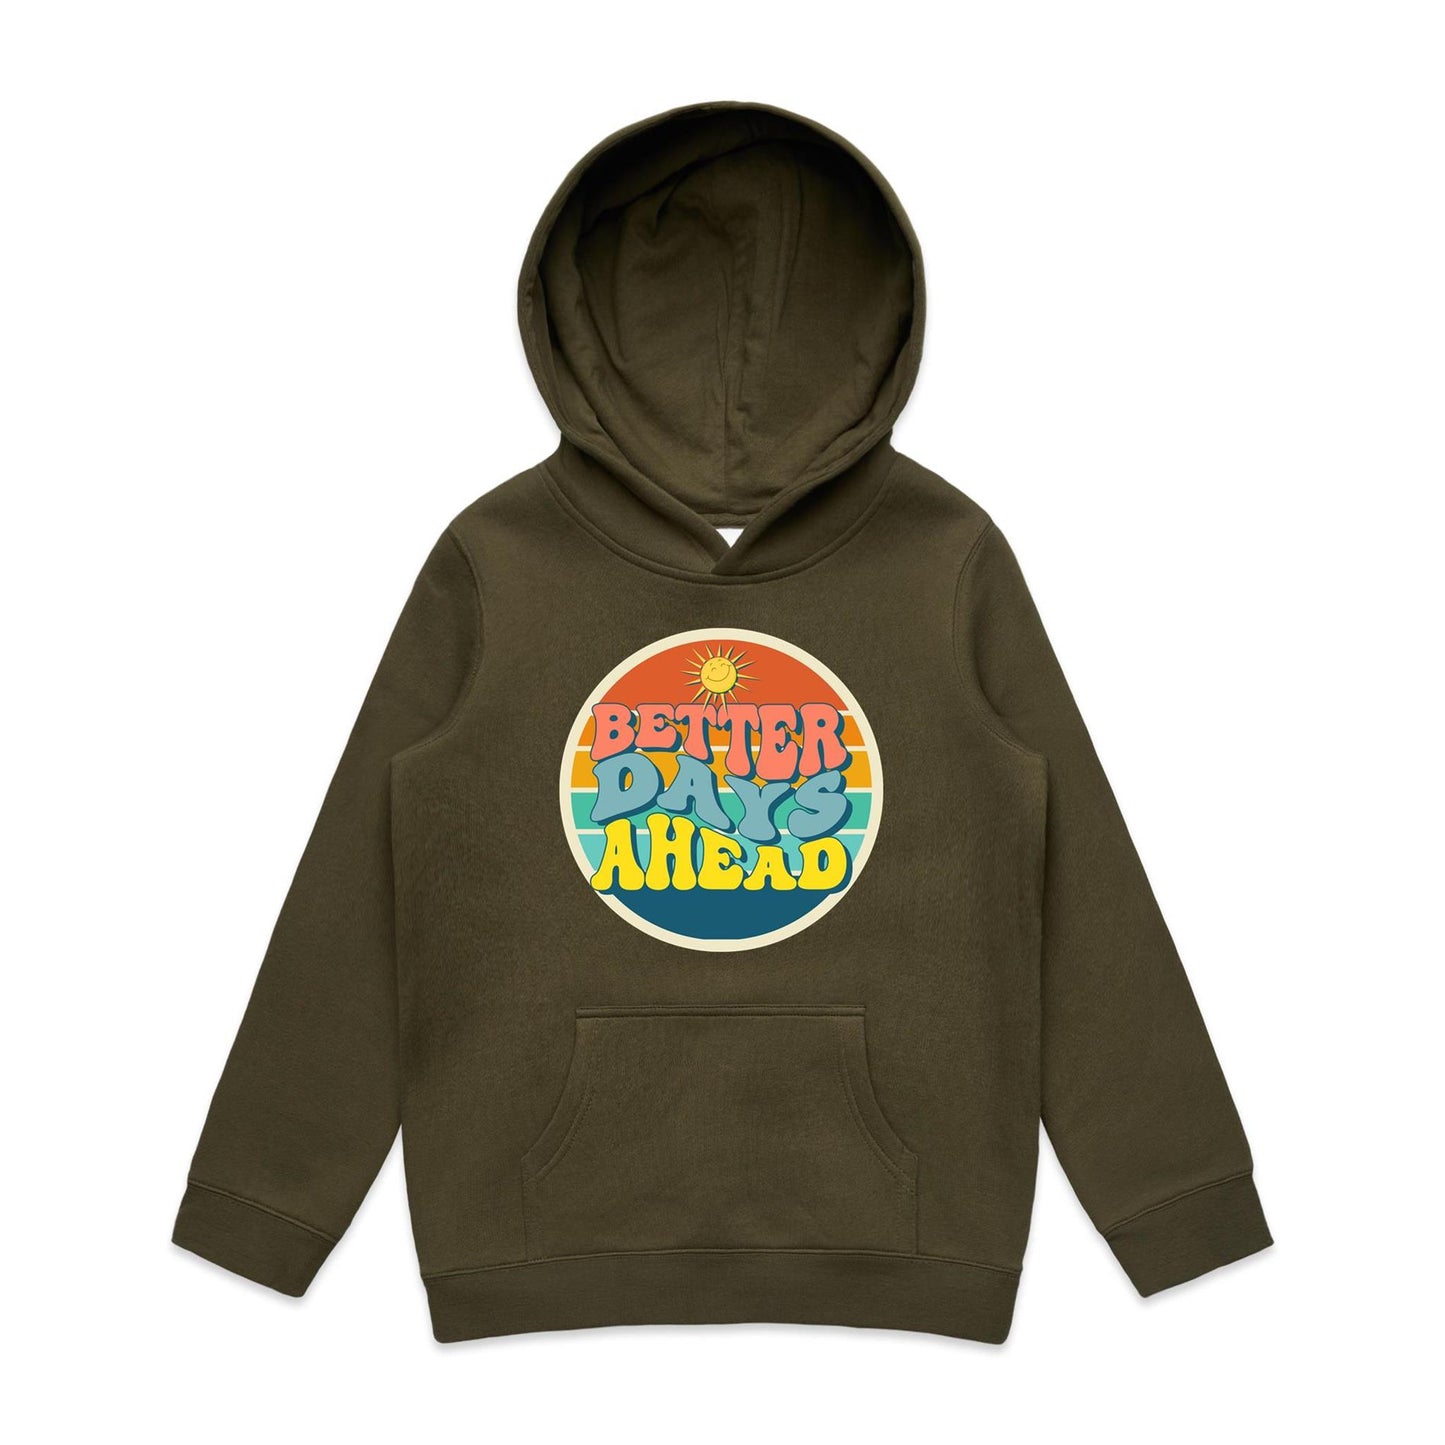 Better Days Ahead - Youth Supply Hood Army Kids Hoodie Motivation Retro